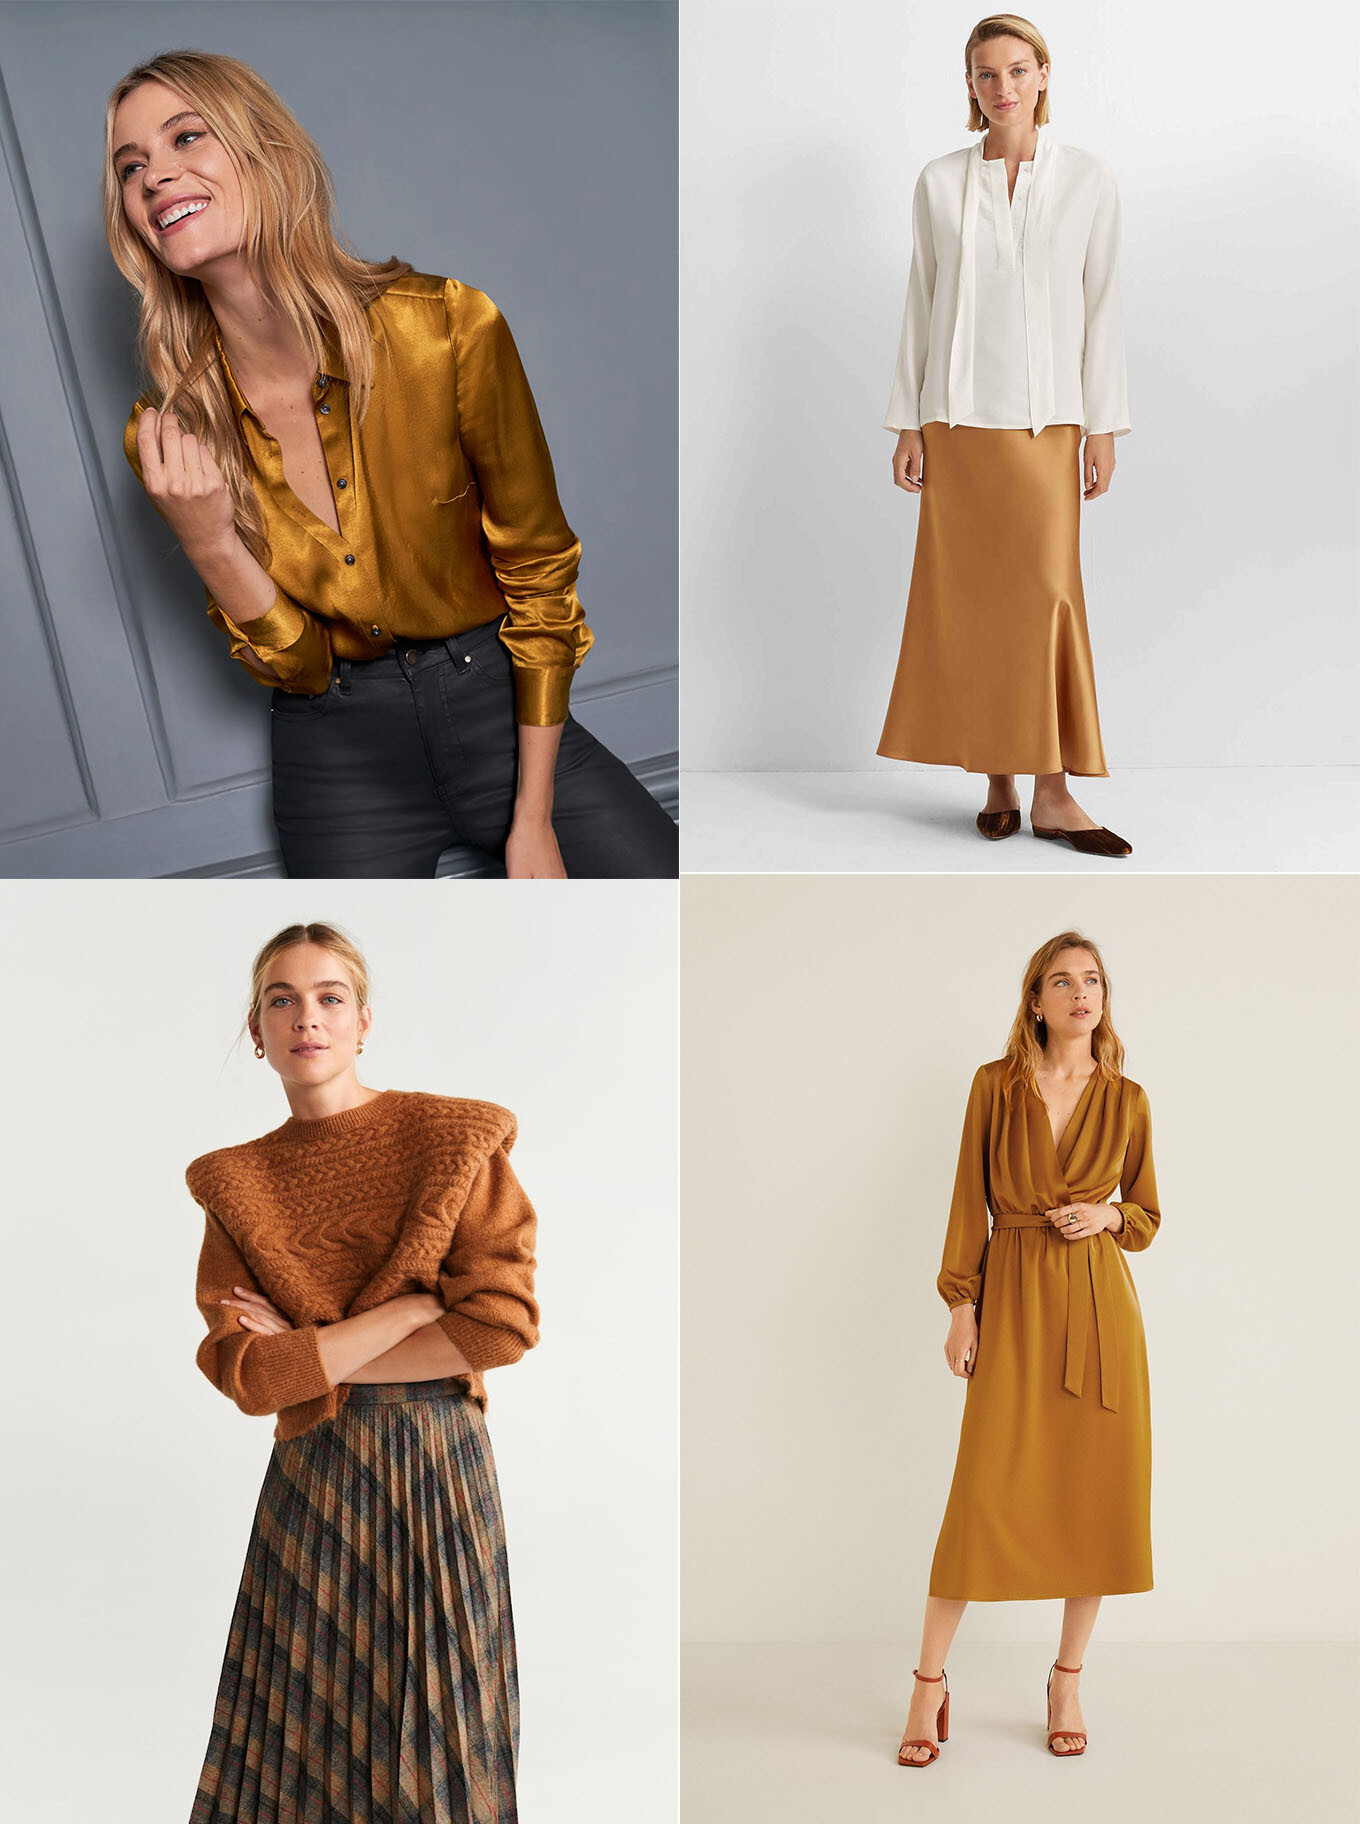 What are you wearing for Thanksgiving? Pick from these beautiful satin dresses, skirts and blouses in caramel, gold and burnt orange.